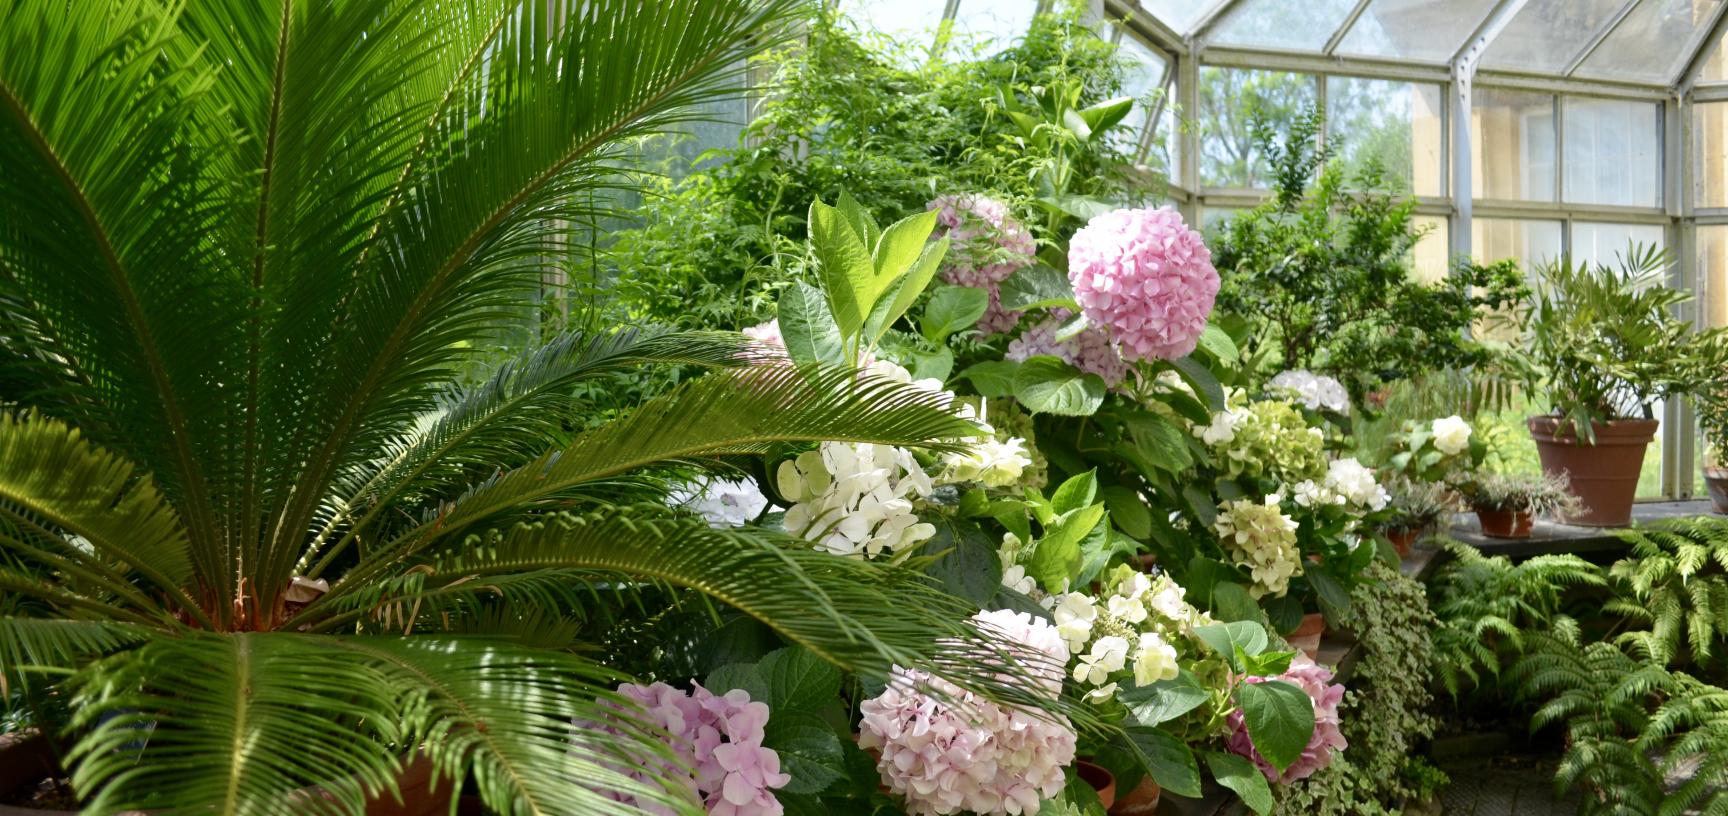 Display in the Conservatory